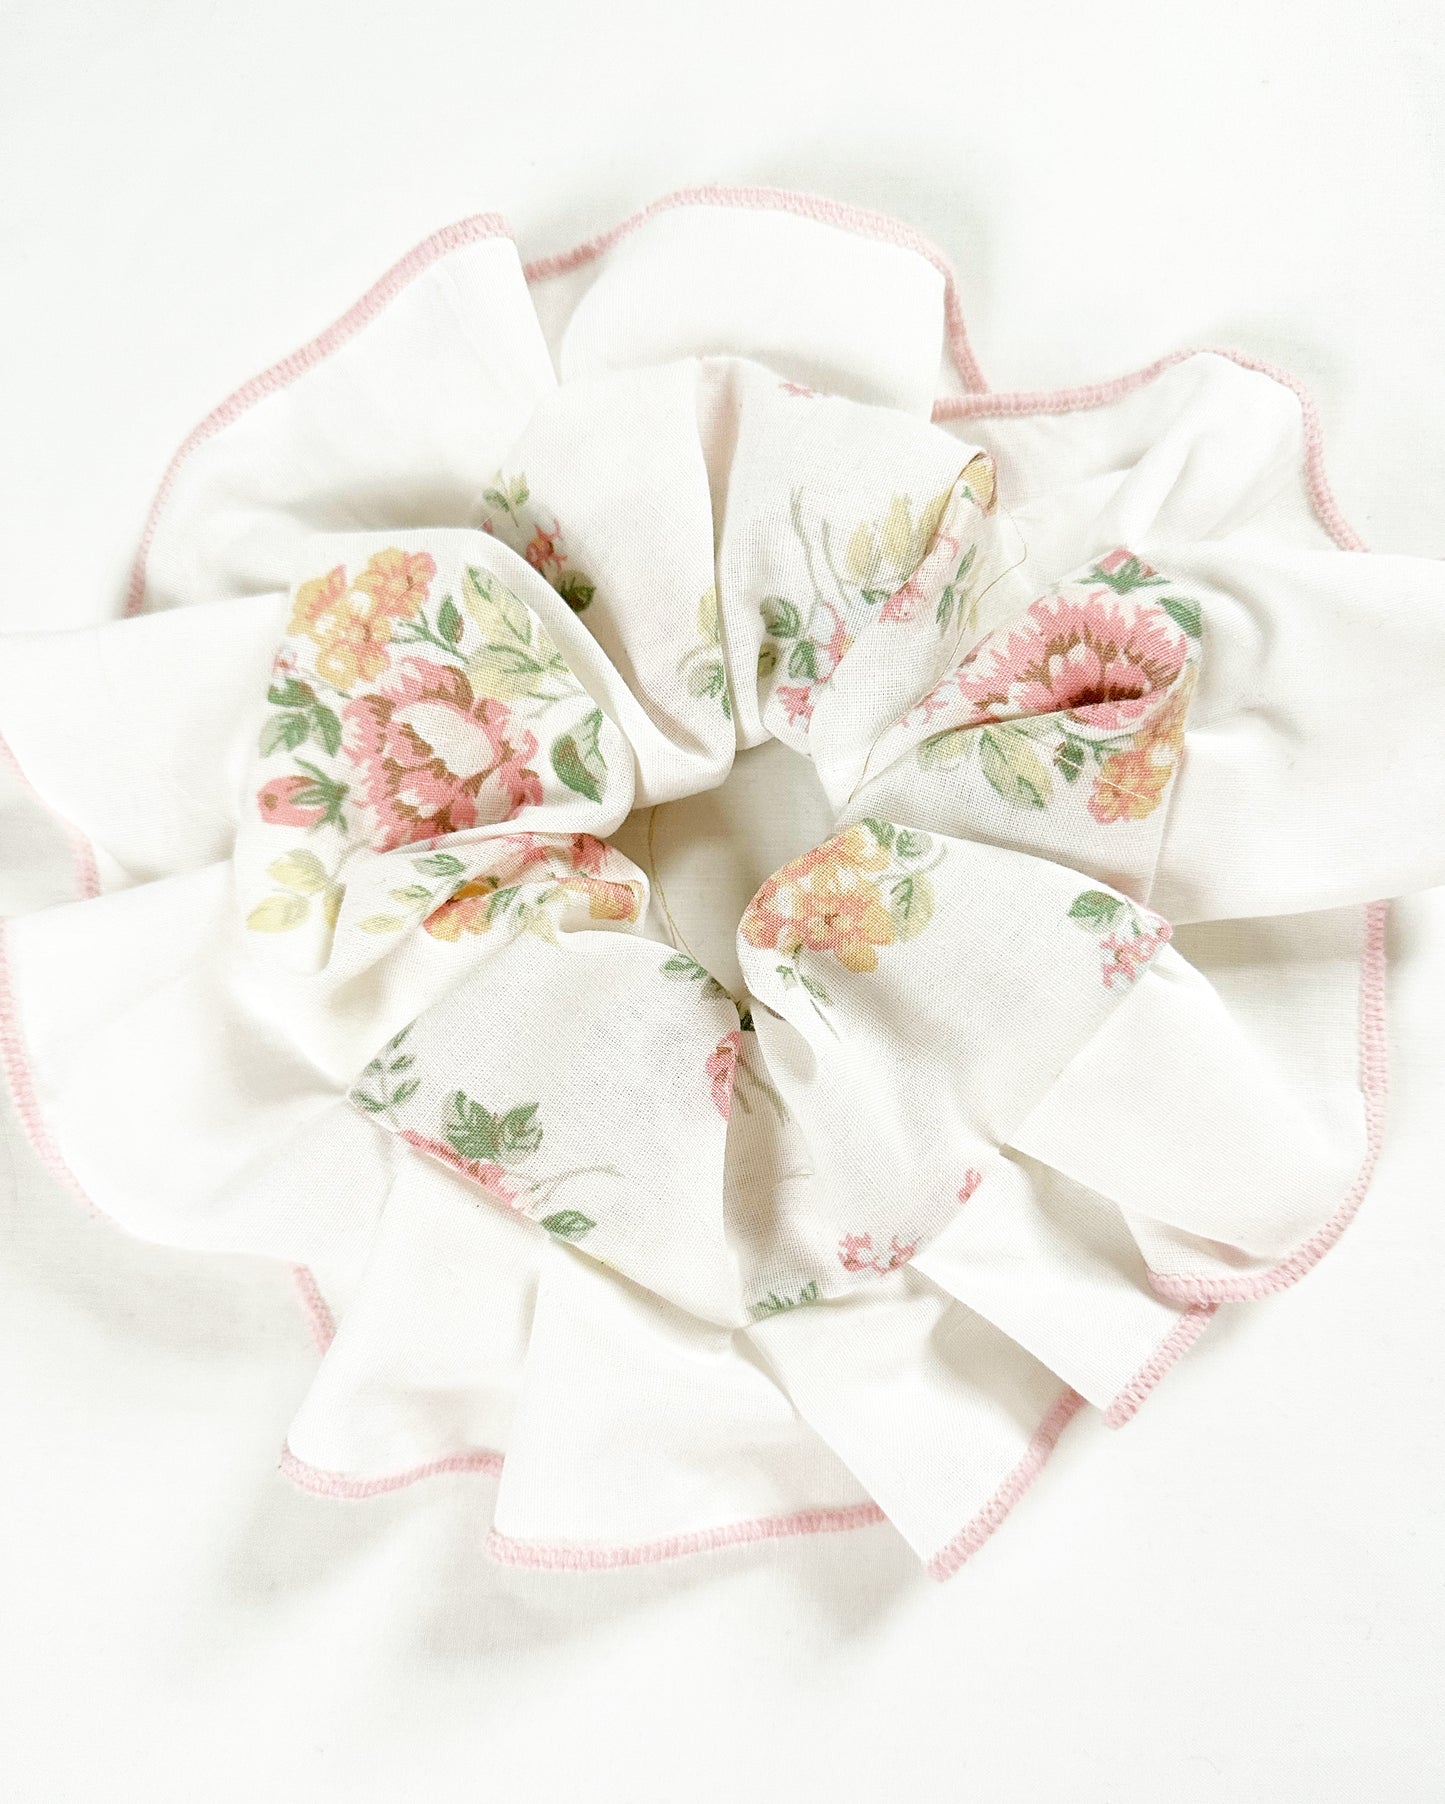 Oversized scrunchie in vintage floral cotton ruffle